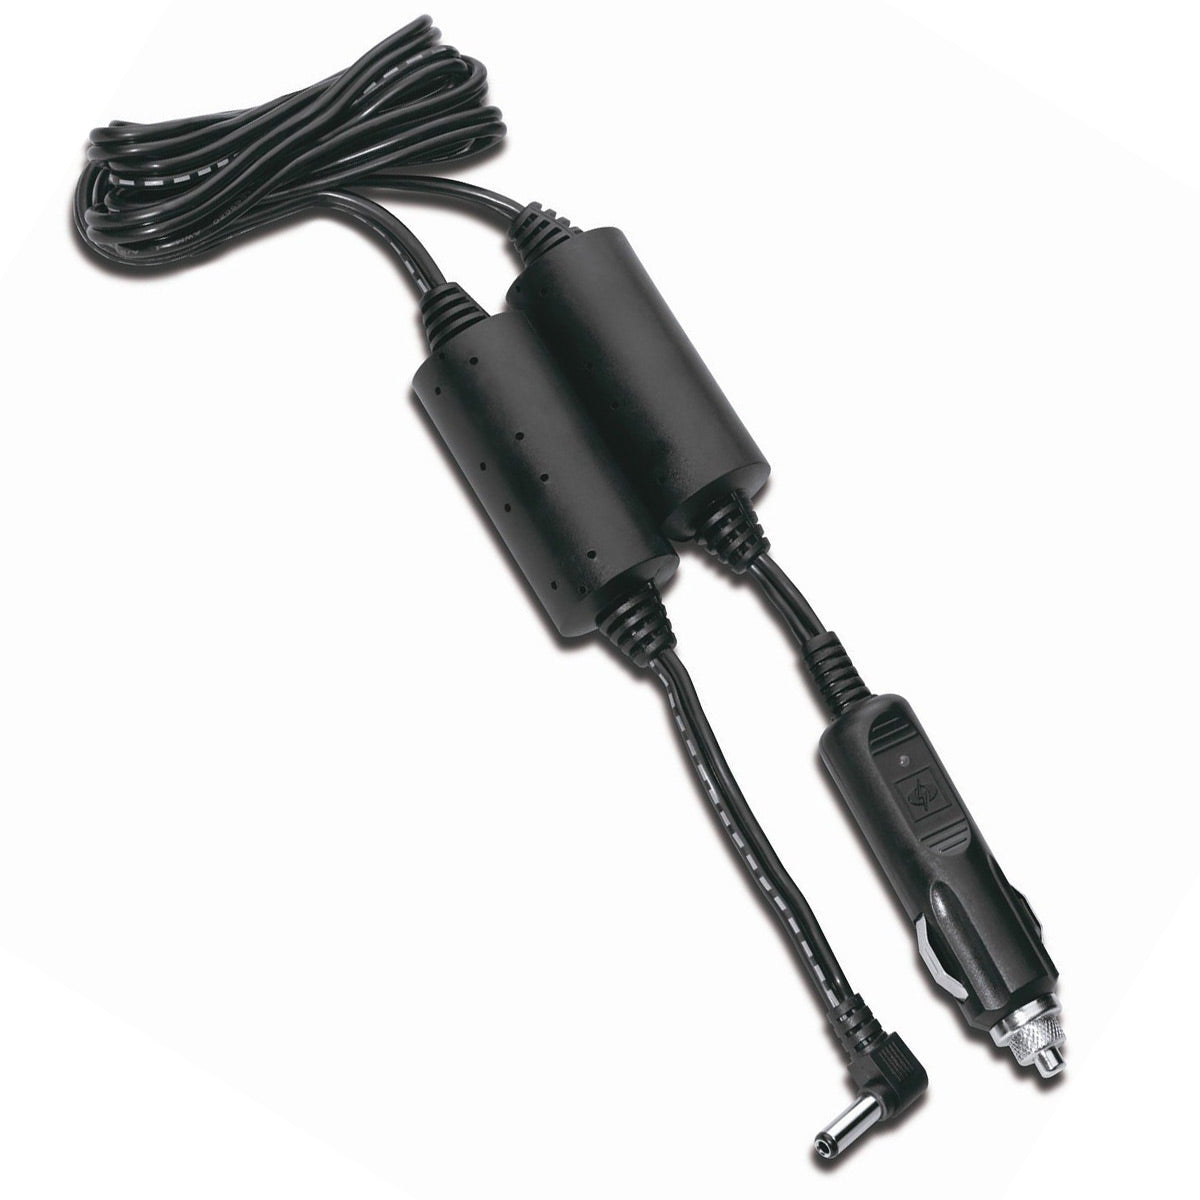 Mobile DC Power Cord for Various Respironics, Covidien and DeVilbiss CPAP/BiPAP Machines